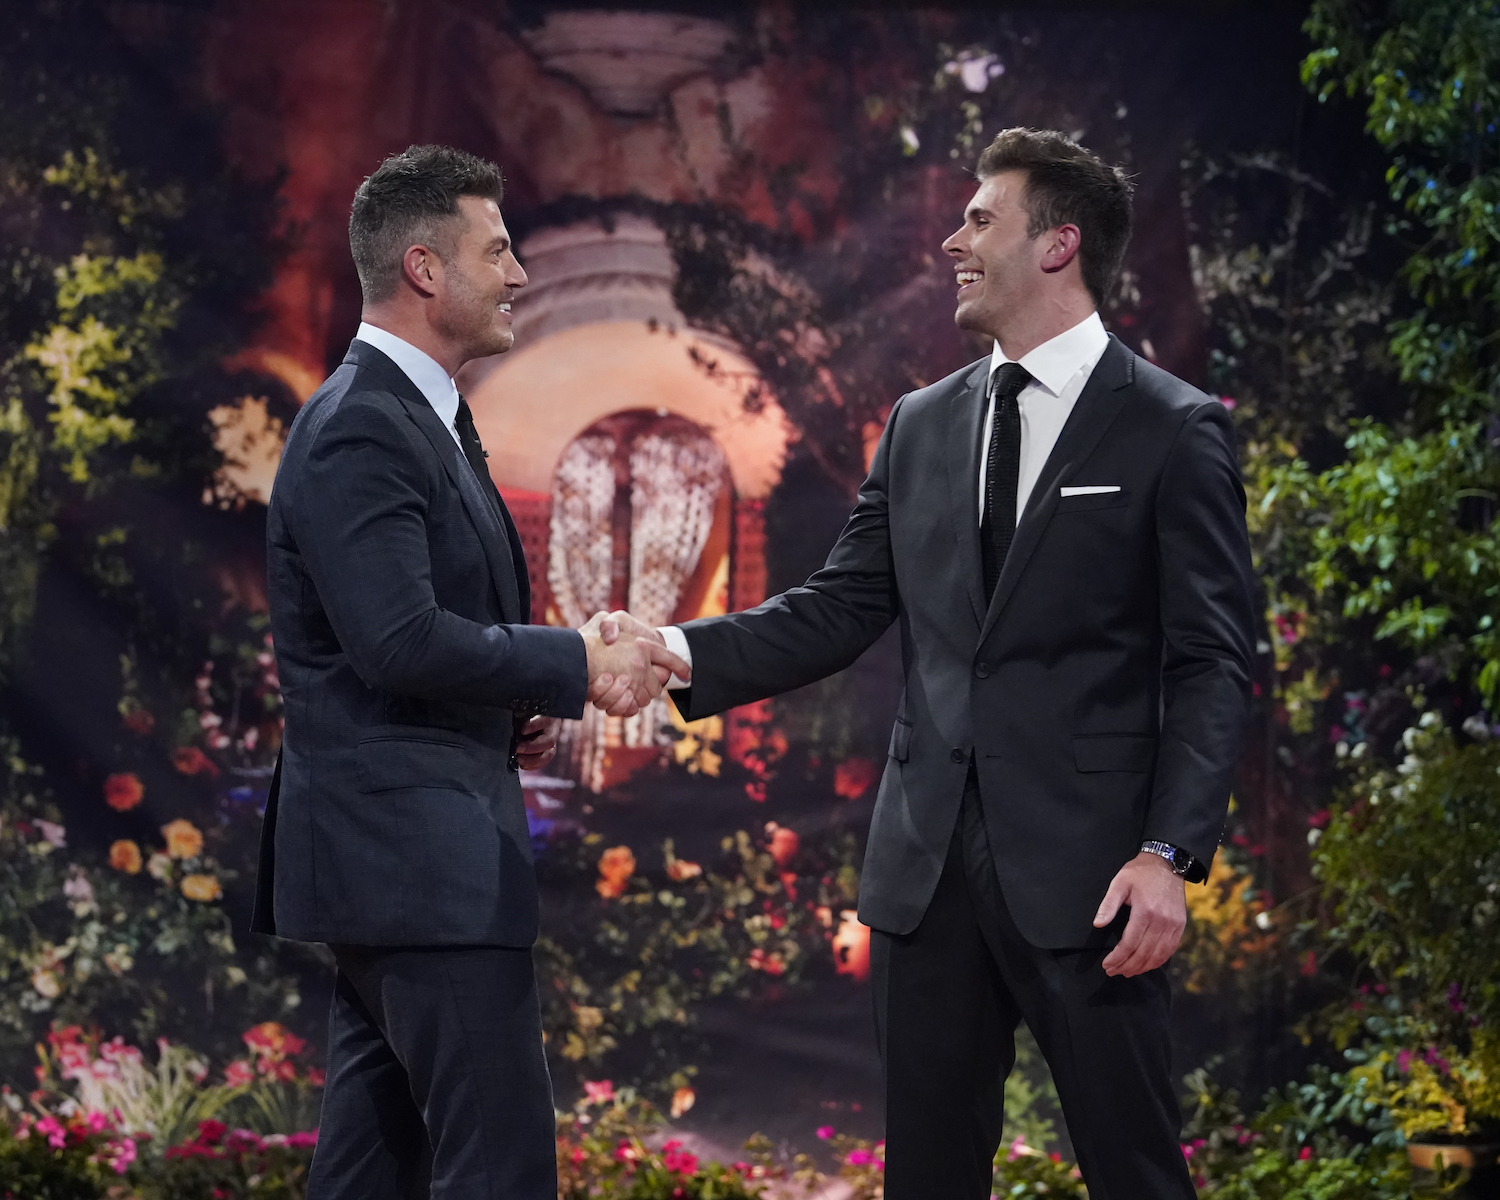 Jesse Palmer and Zach Shallcross shaking hands on stage. Zach is the lead for 'The Bachelor' Season 27